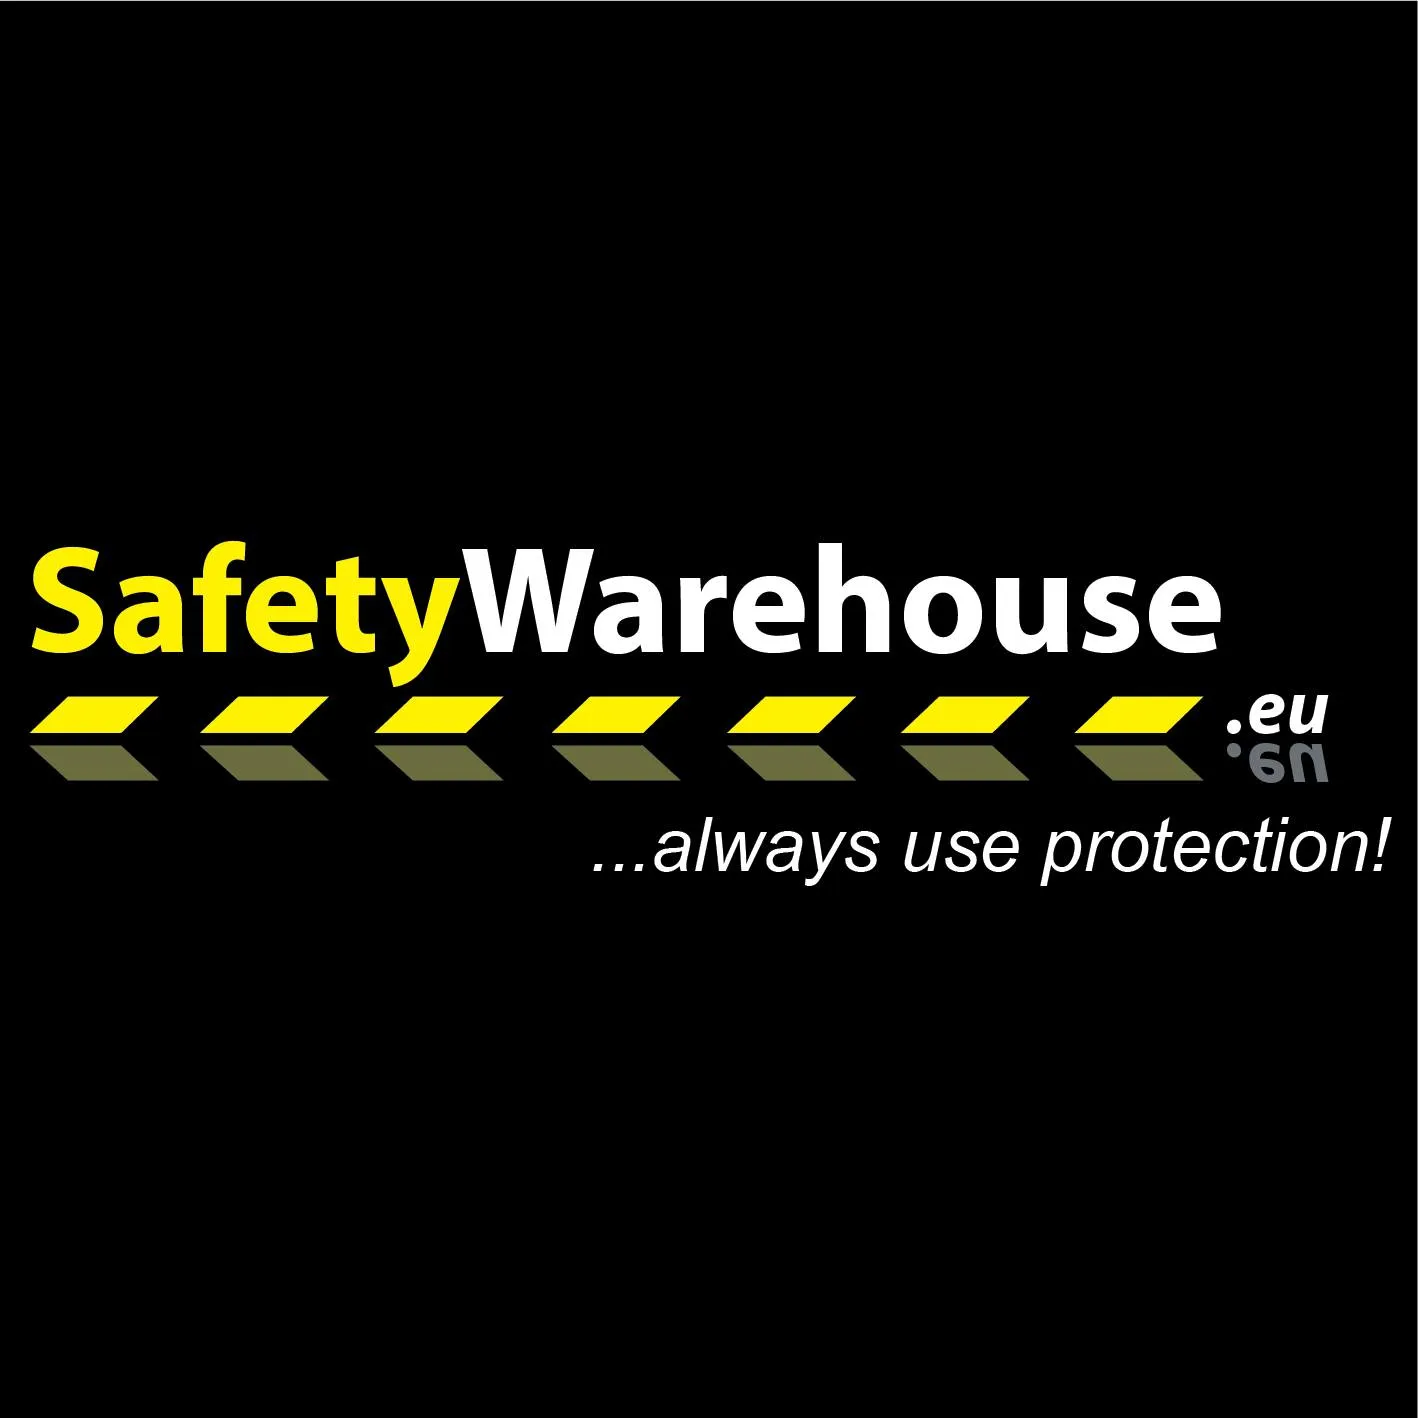 safetywarehouse.co